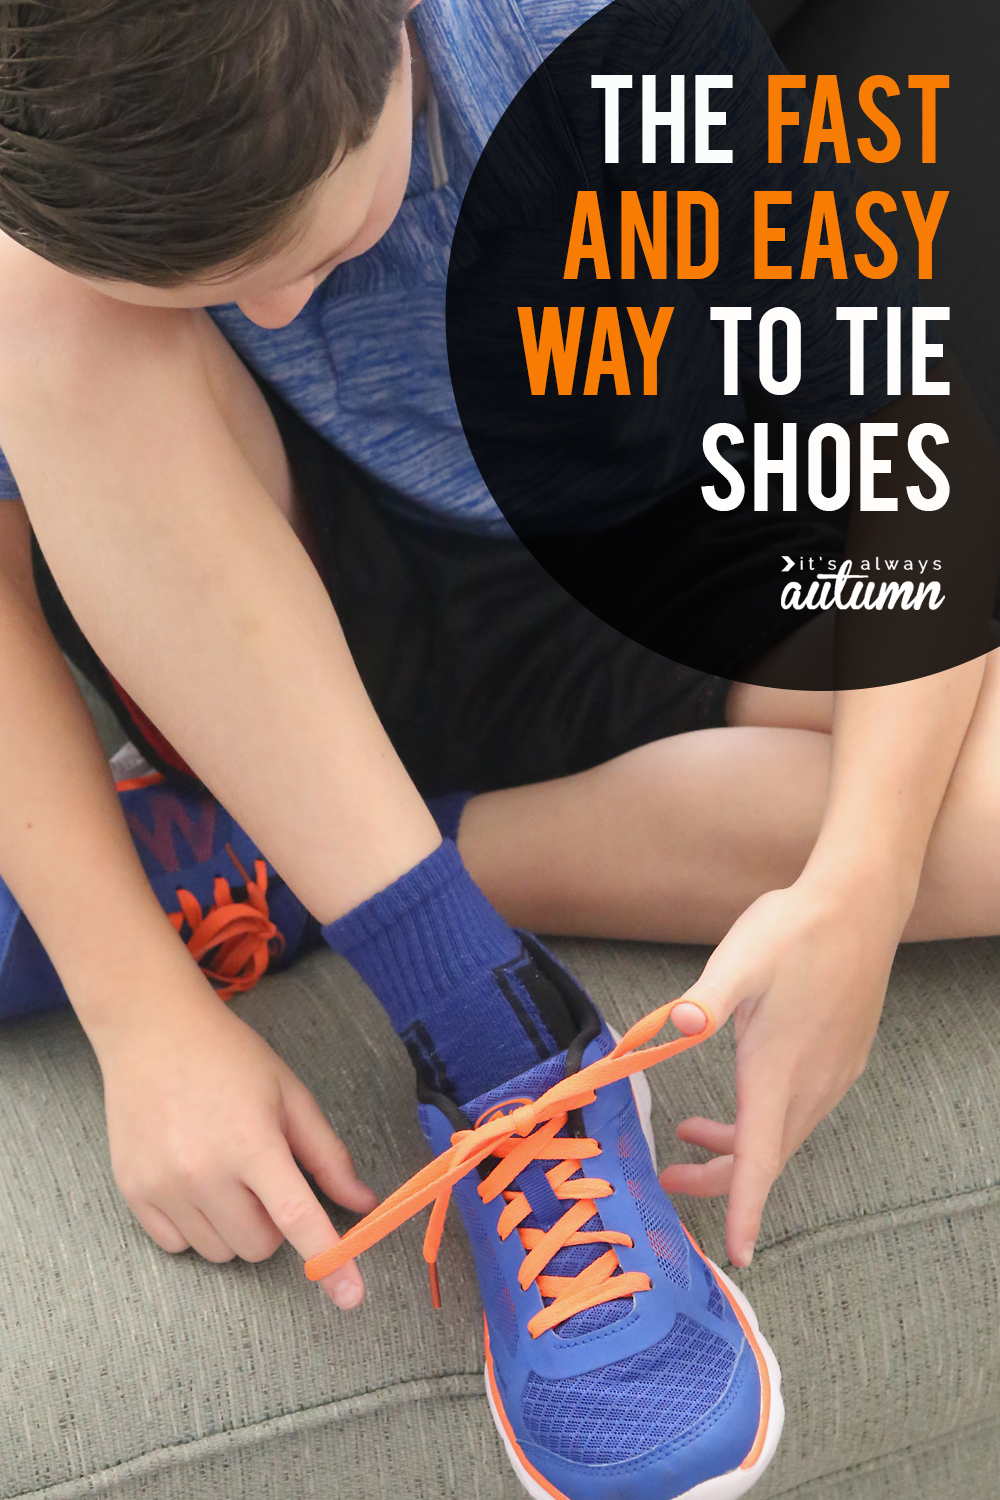 Teach your kids the fast and easy way to tie shoes! This technique is perfect for kids who have a hard time with the standard shoe tying approach.